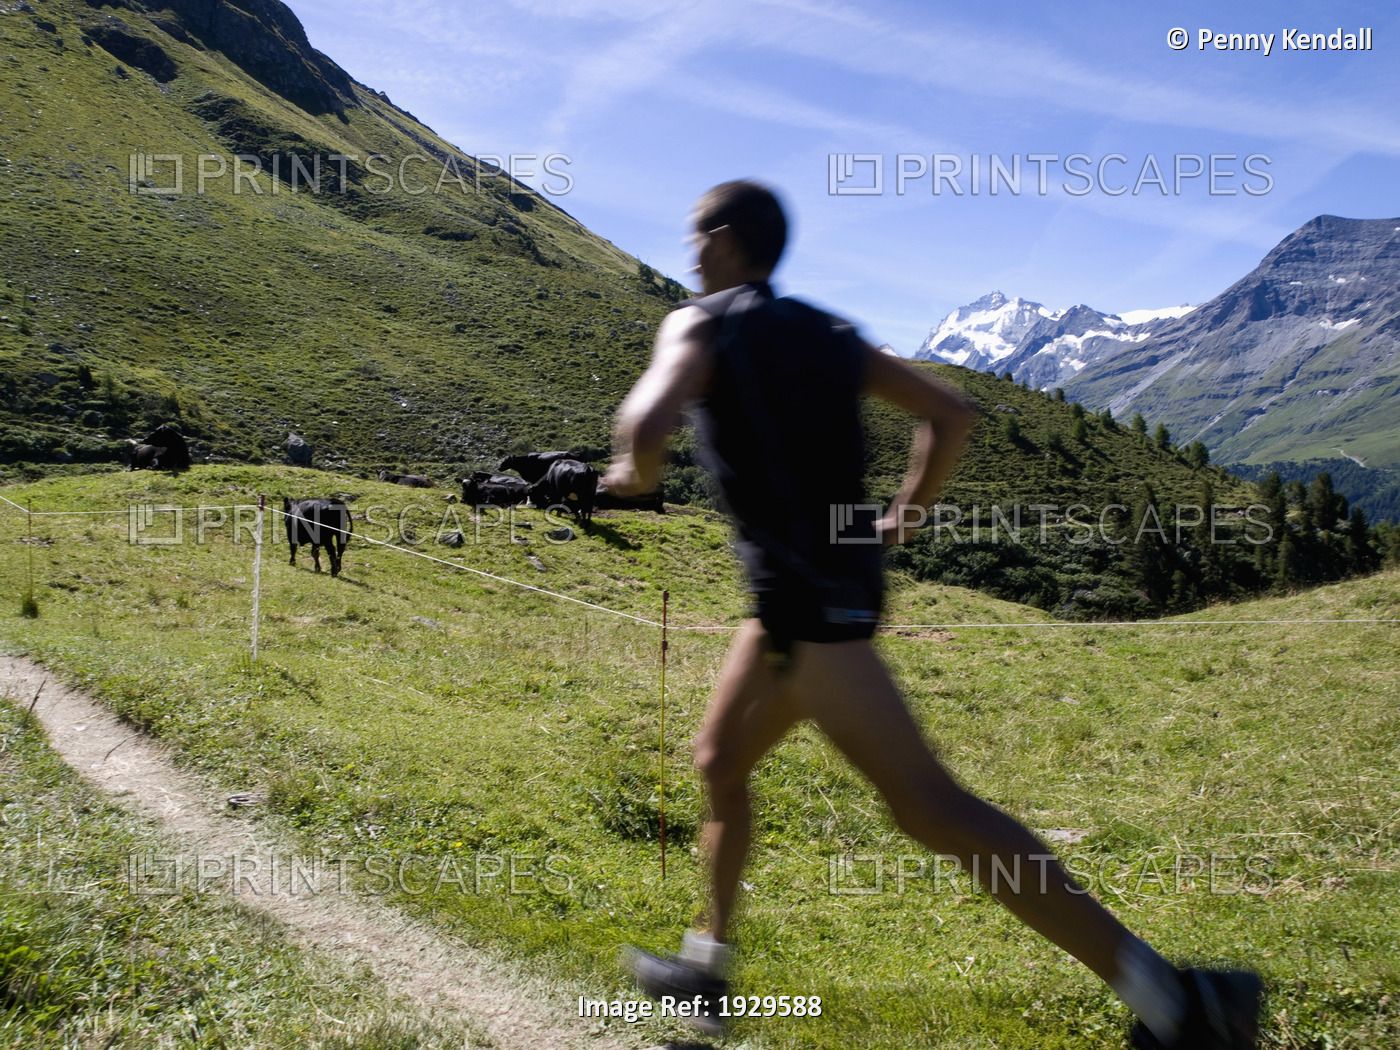 Annual mountain marathon race between Sierre and Zinal. Runner approaches ...